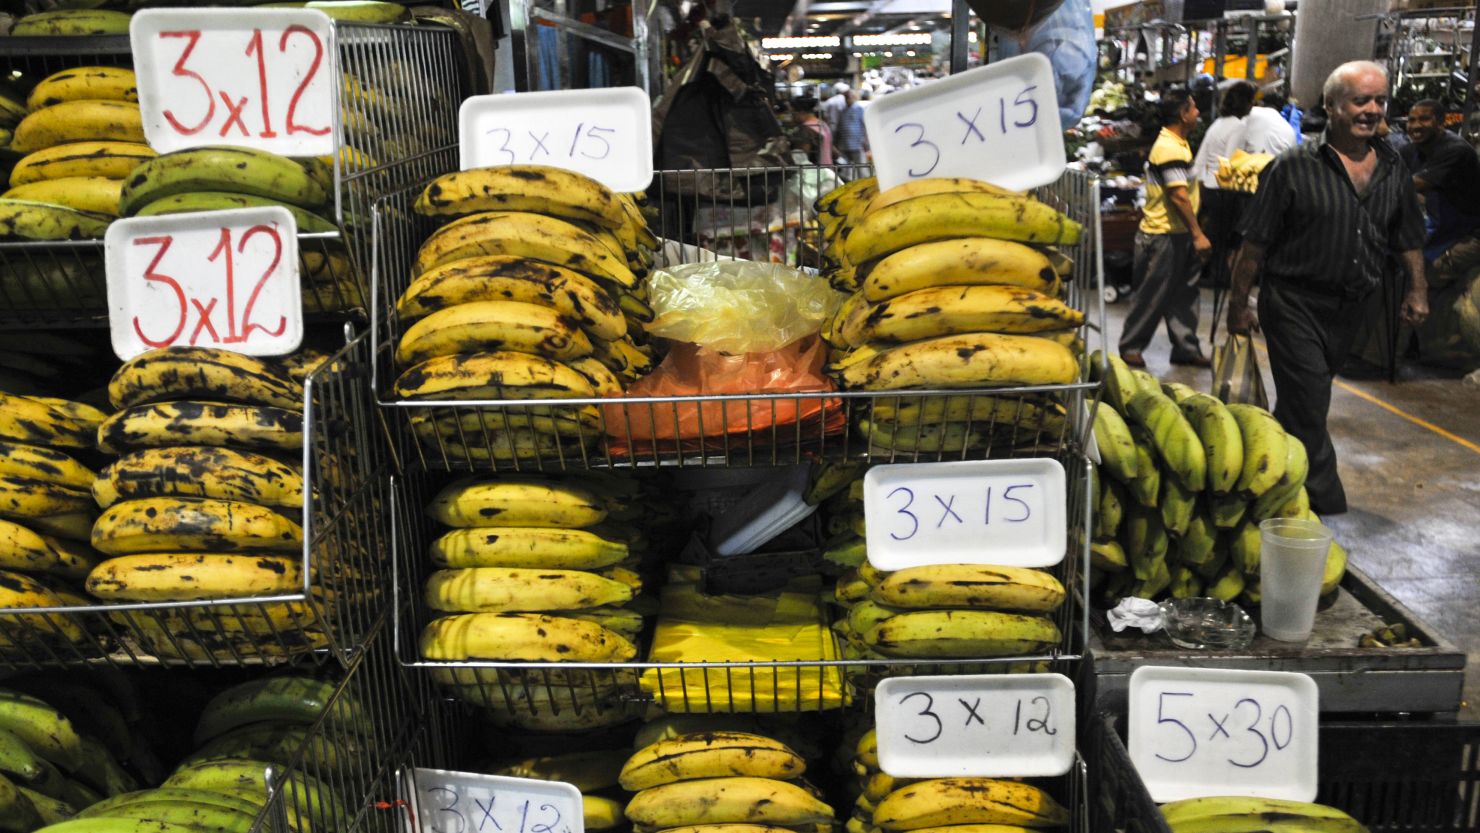 A man walks next to a banana stand in a public market in Caracas on May 06, 2011. Buying food has become a daily ordeal for many Venezuelans.